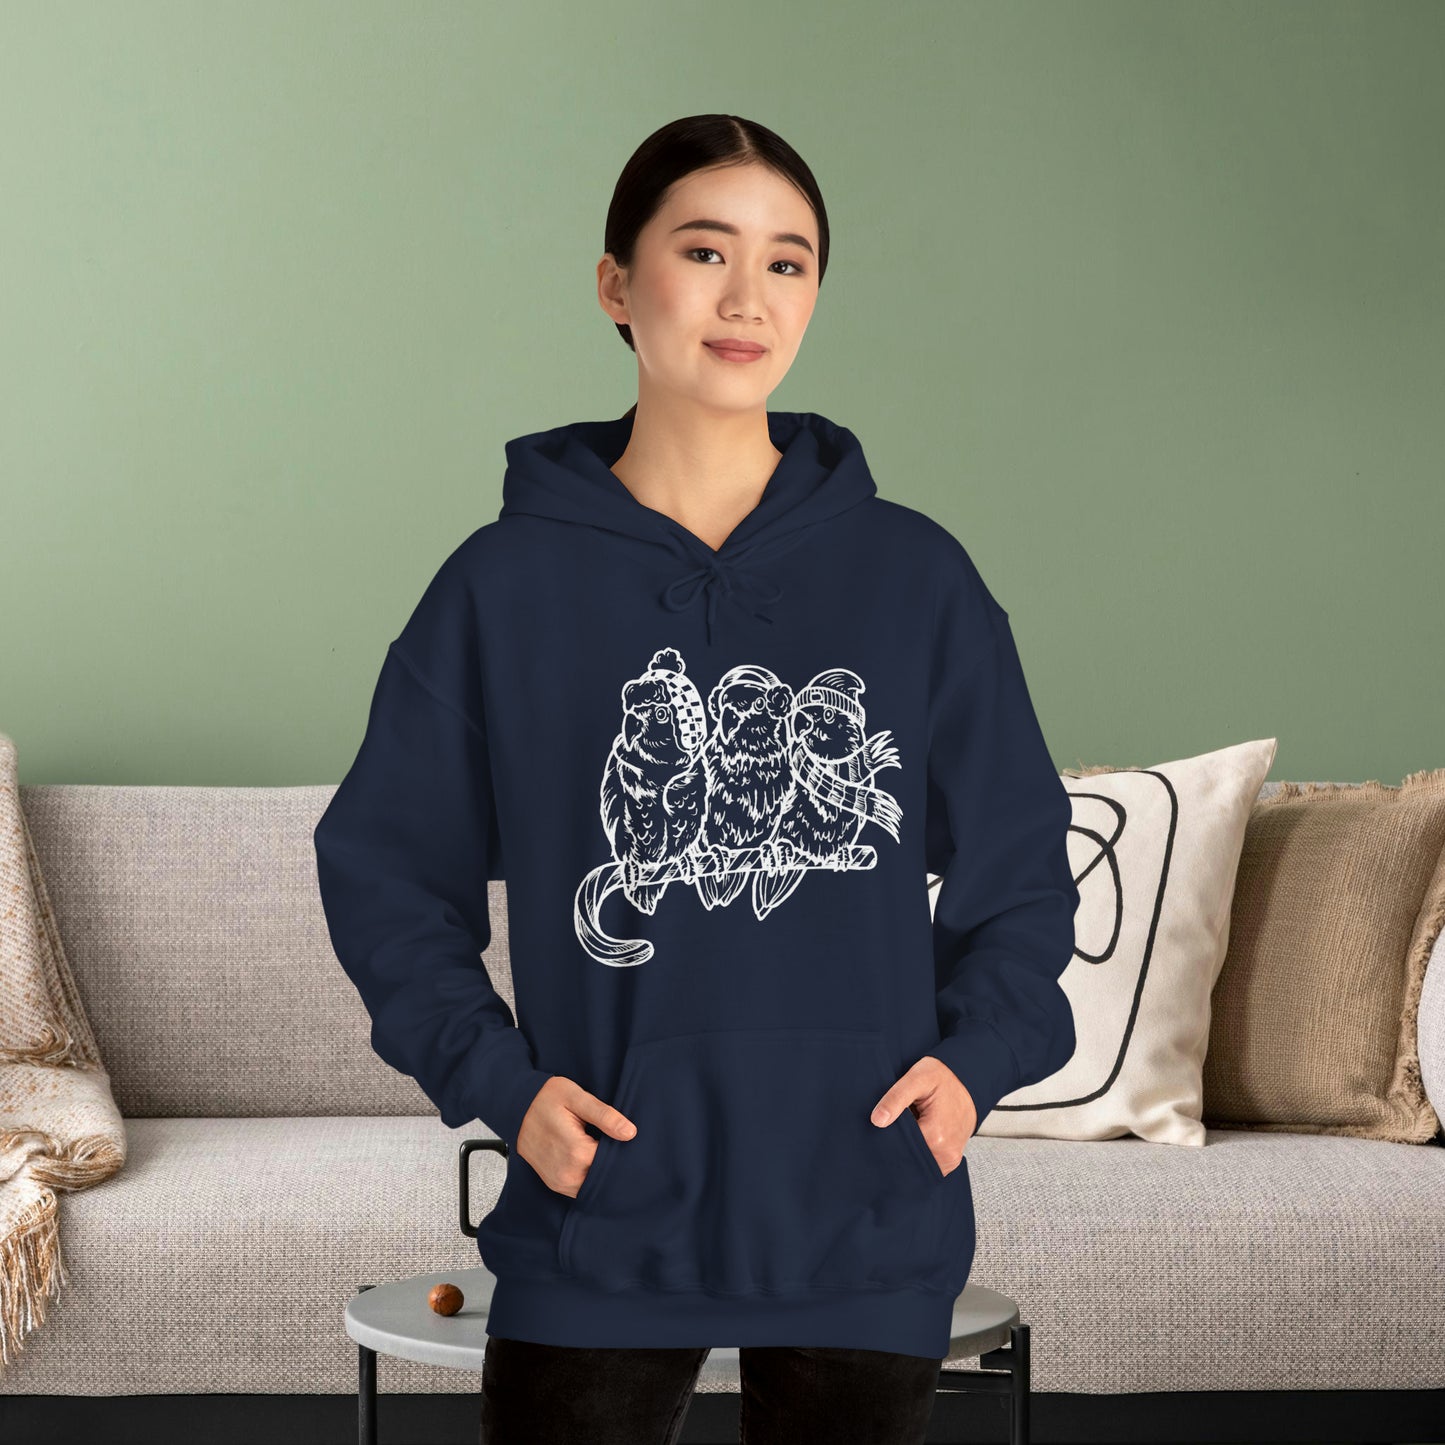 3 Lovebirds with Winter Wear & Perched on a Candy Cane, Line Art Hoodie